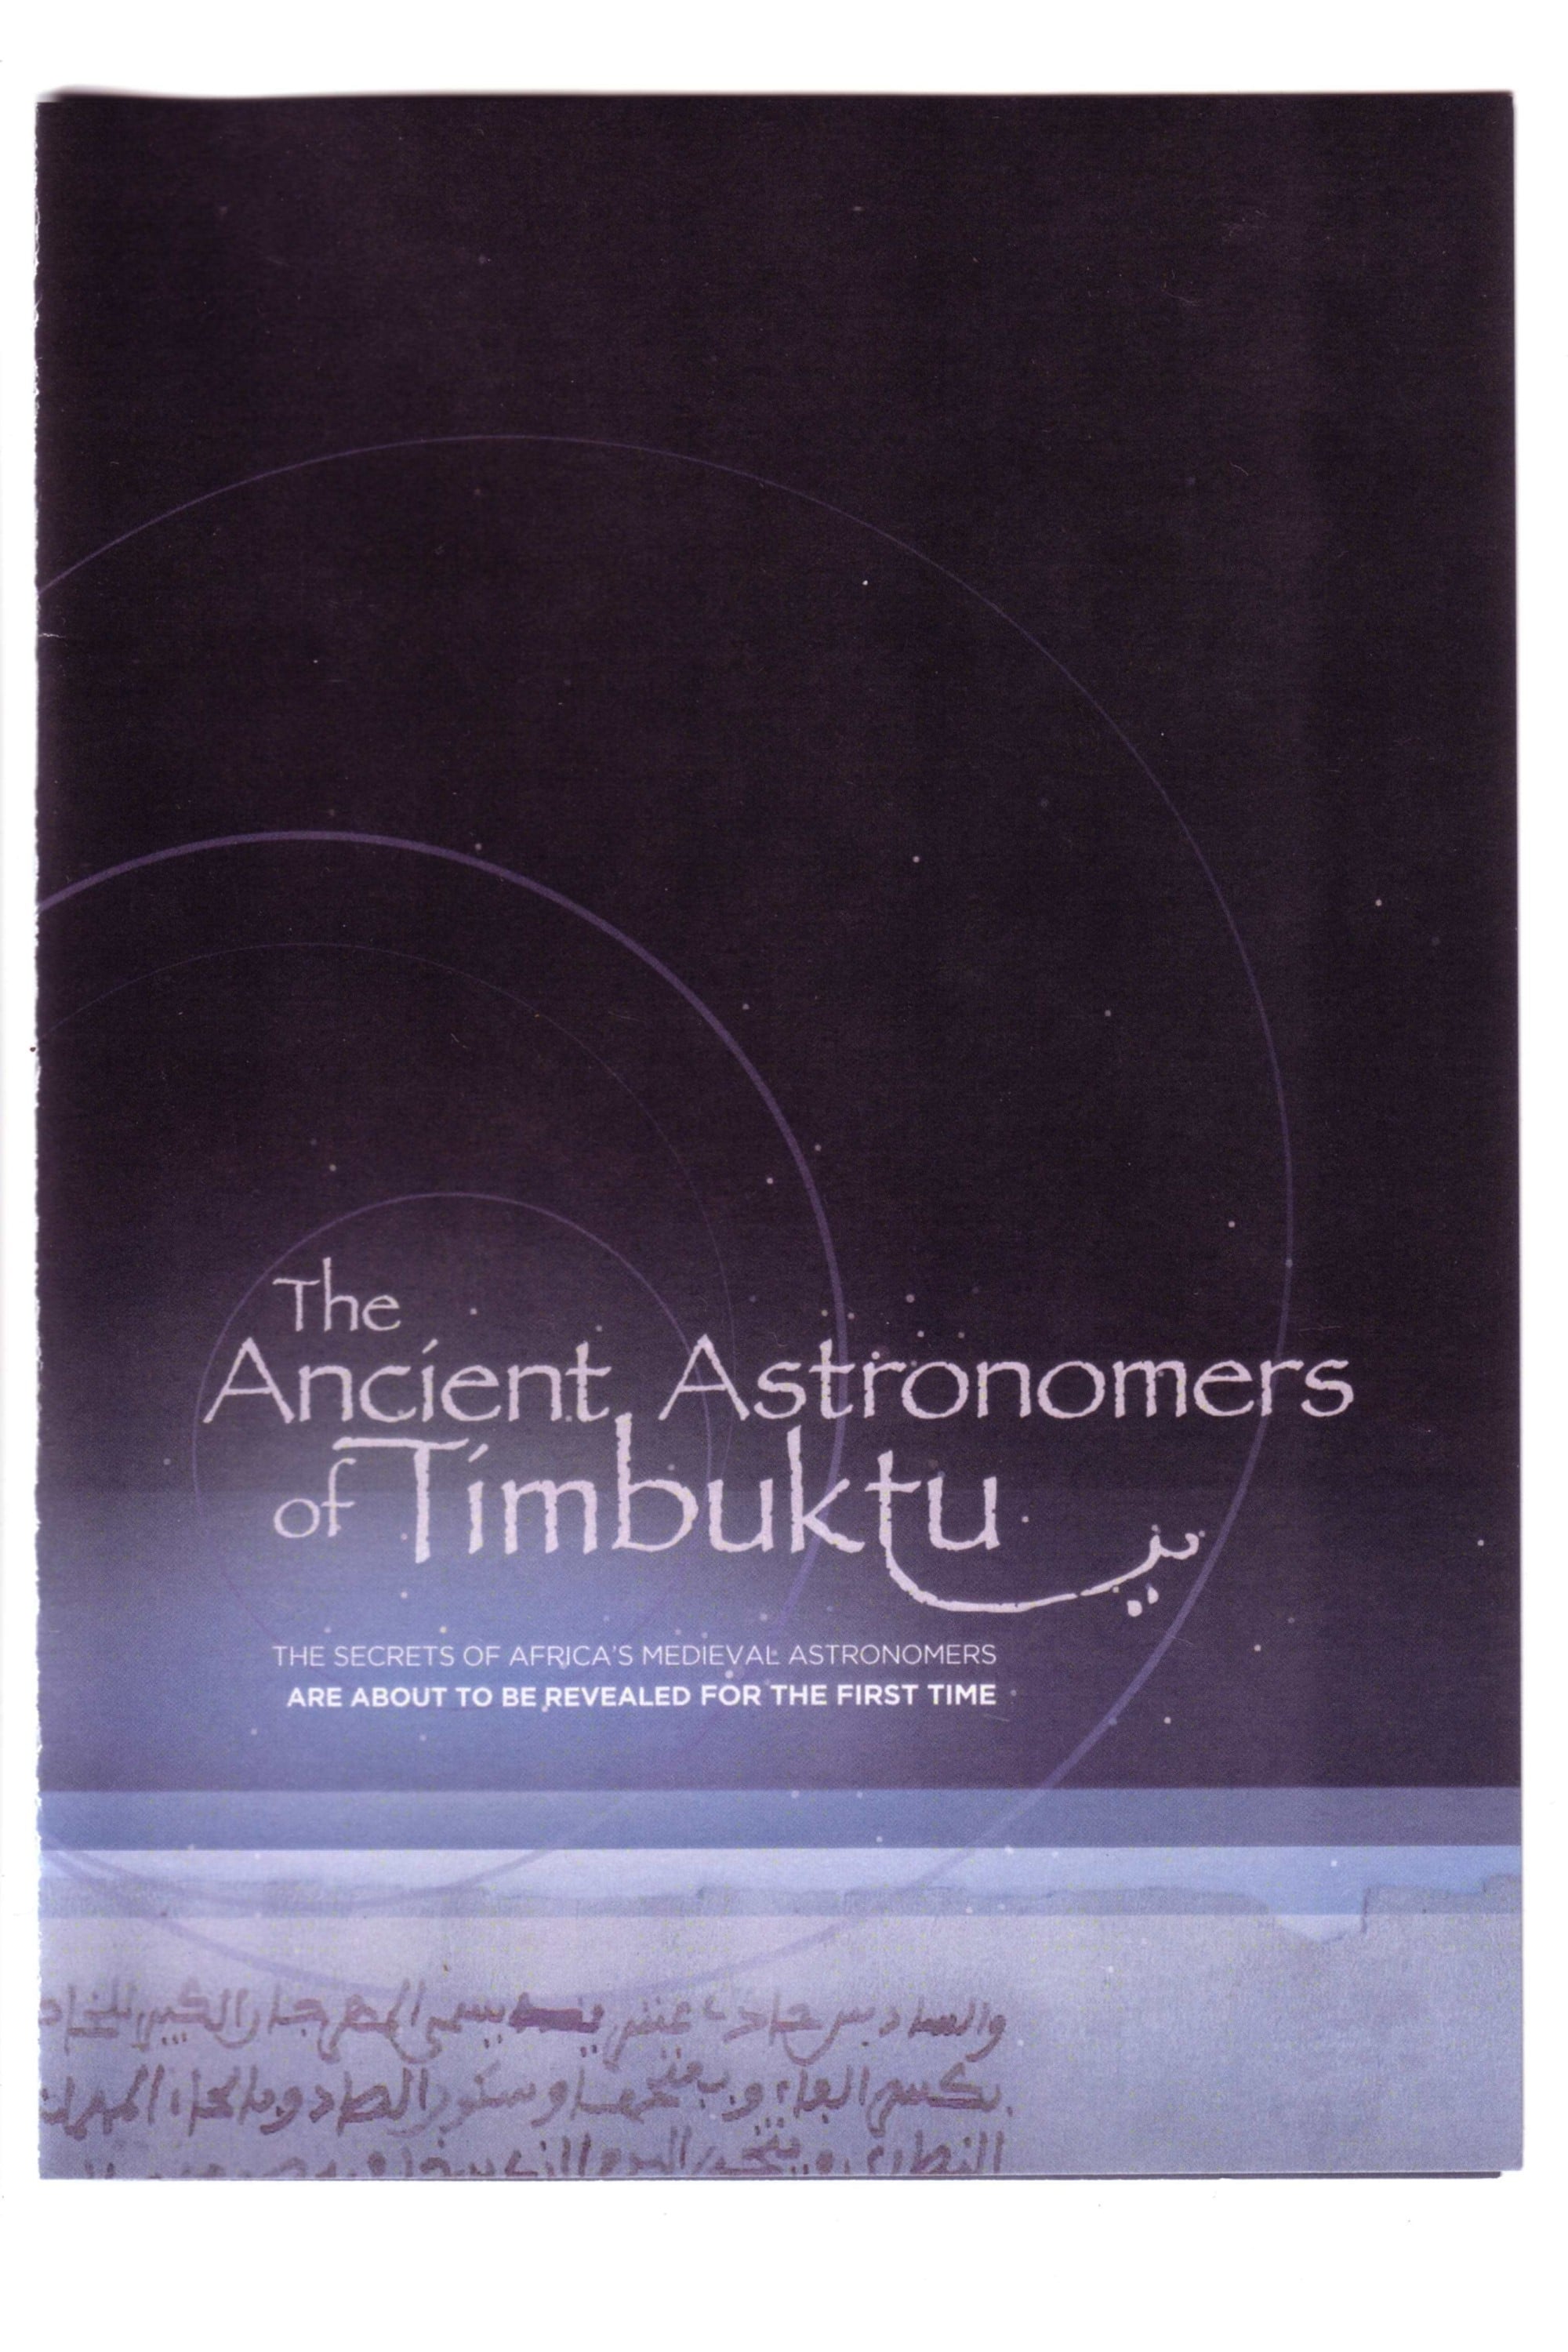 The Ancient Astronomers of Timbuktu